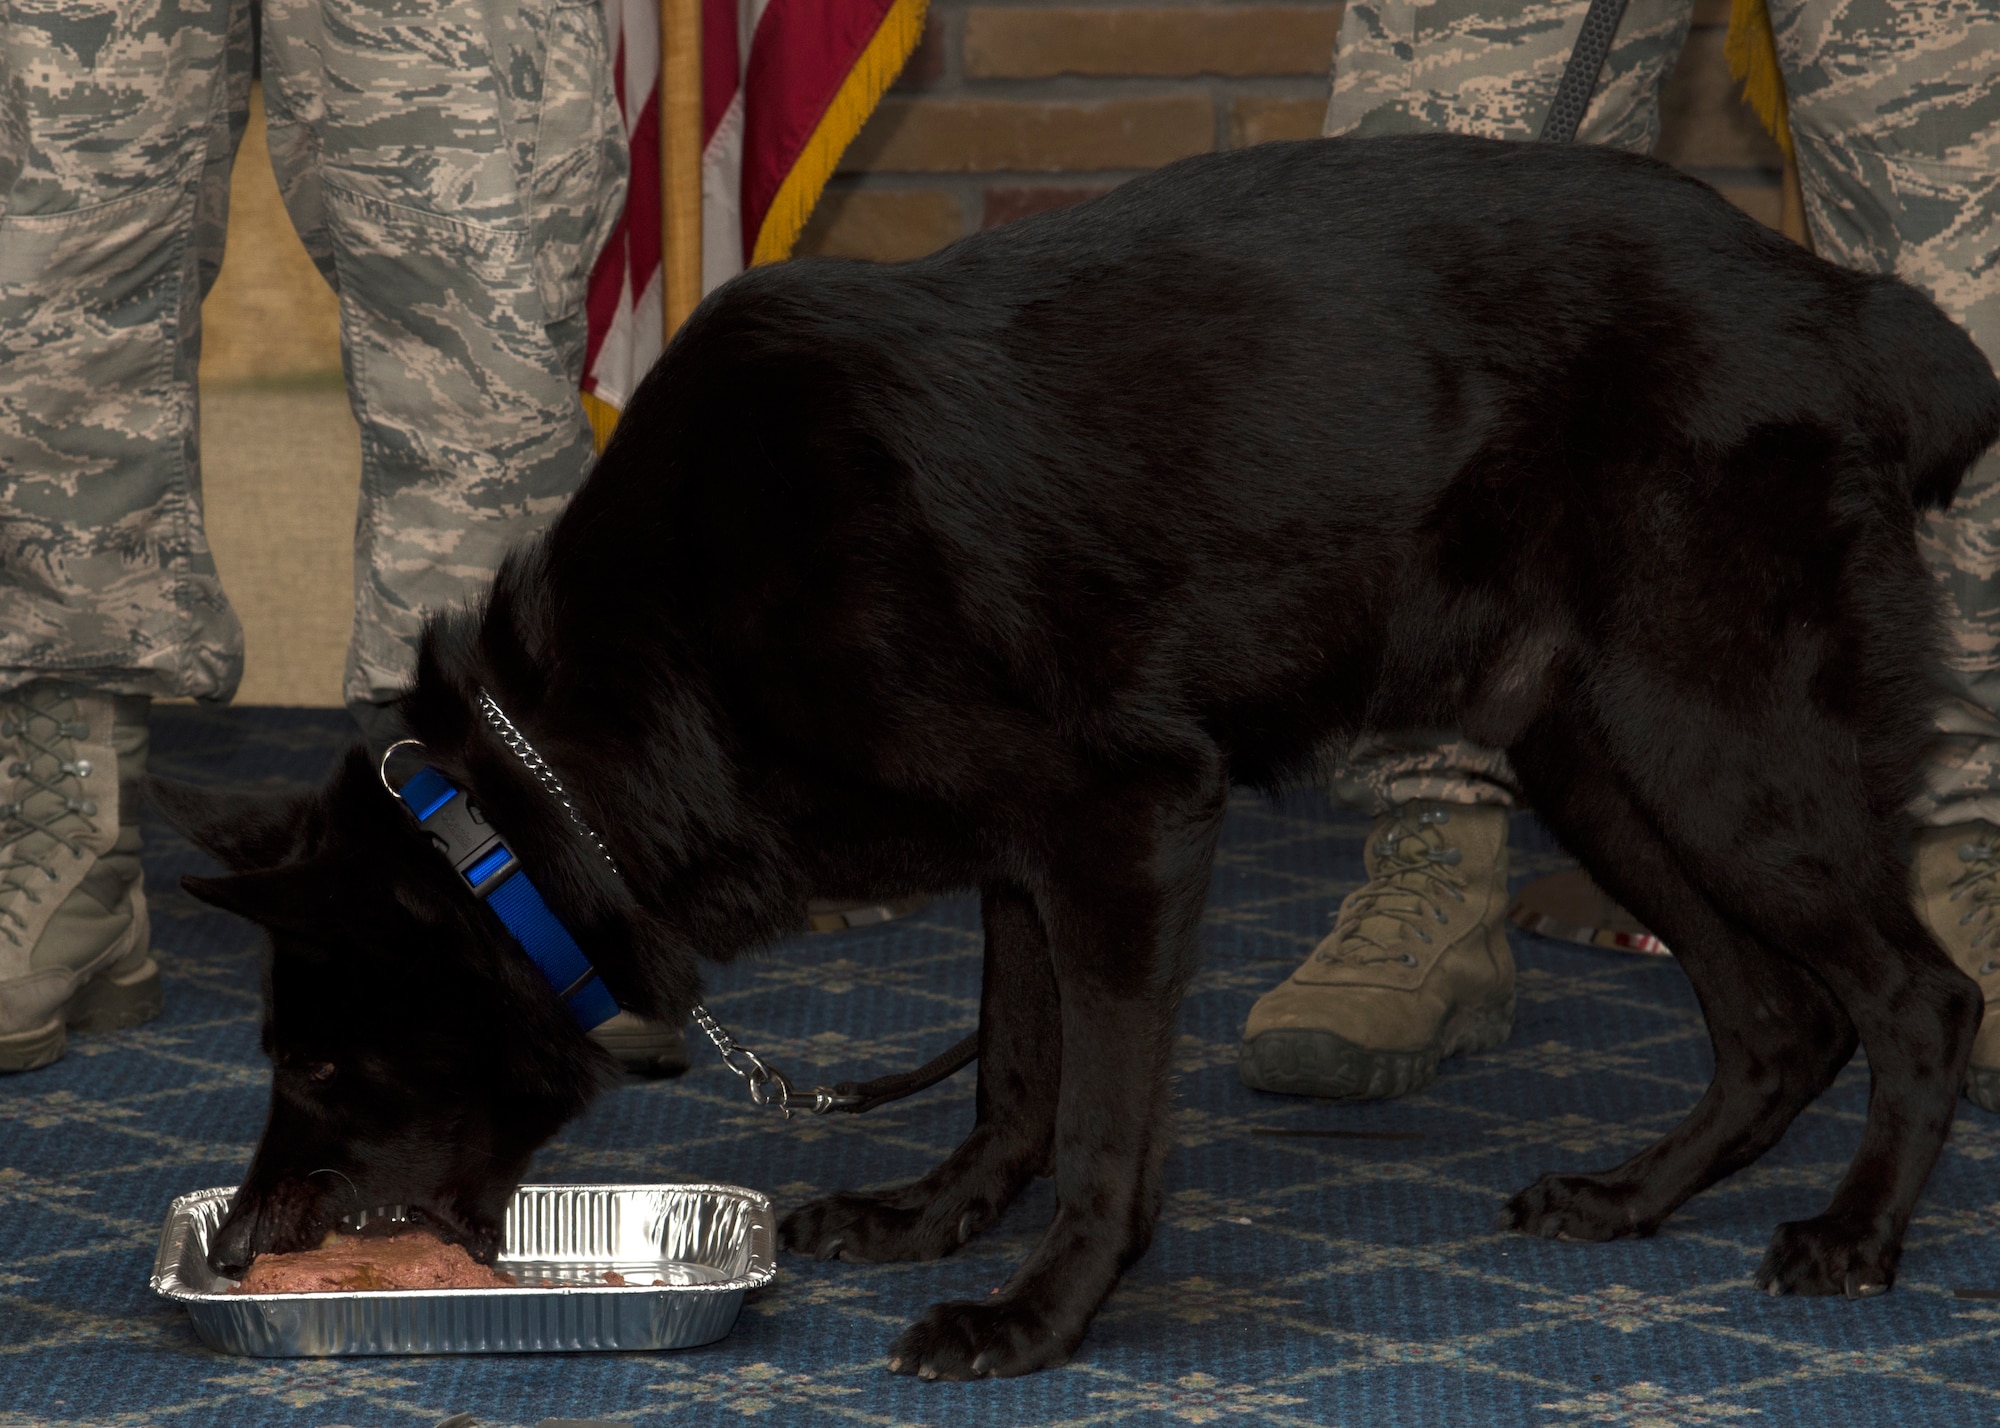 Vulkan, military working dog for the 49th Security Forces Squadron, eats a cake during his retirement ceremony at Holloman Air Force Base, N.M., July 27, 2018. Vulkan deployed to Bagram Air Base, Afghanistan, Al Udeid Air Base, Qatar and Ahmad al-Jaber Air Base, Kuwait during his service supporting operations Inherent Resolve and Enduring Freedom.